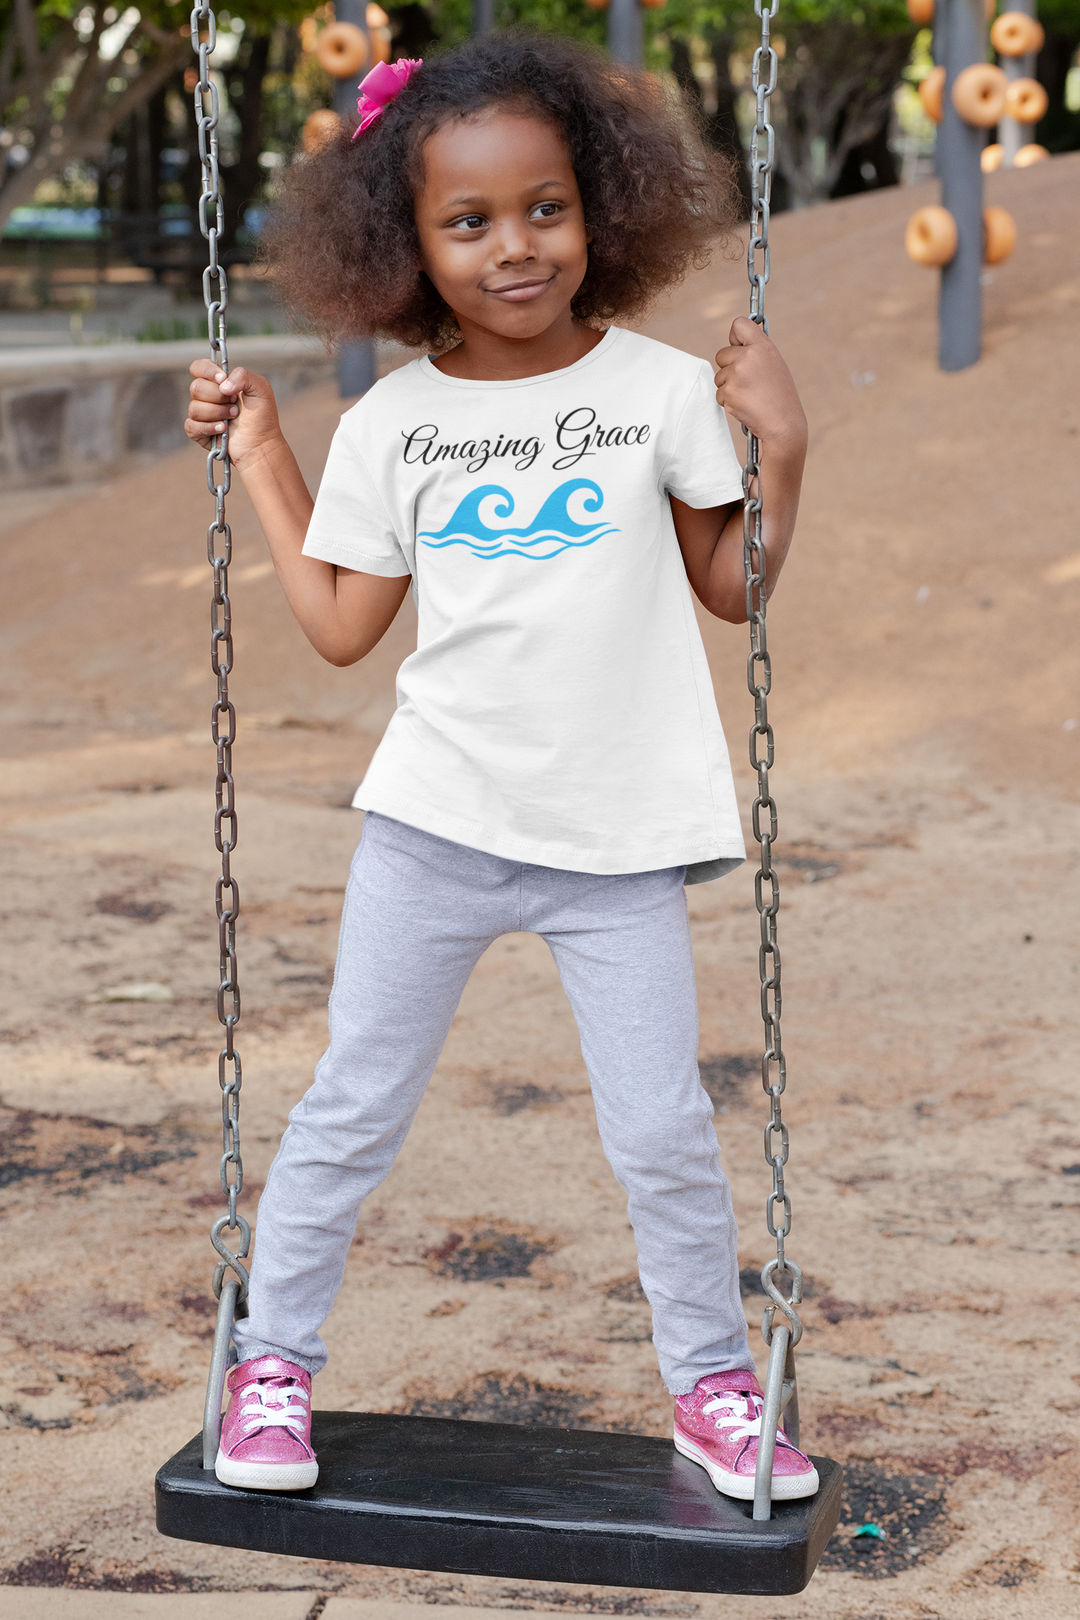 Amazing Grace. Gospel song graphic t shirt for toddlers and kids.